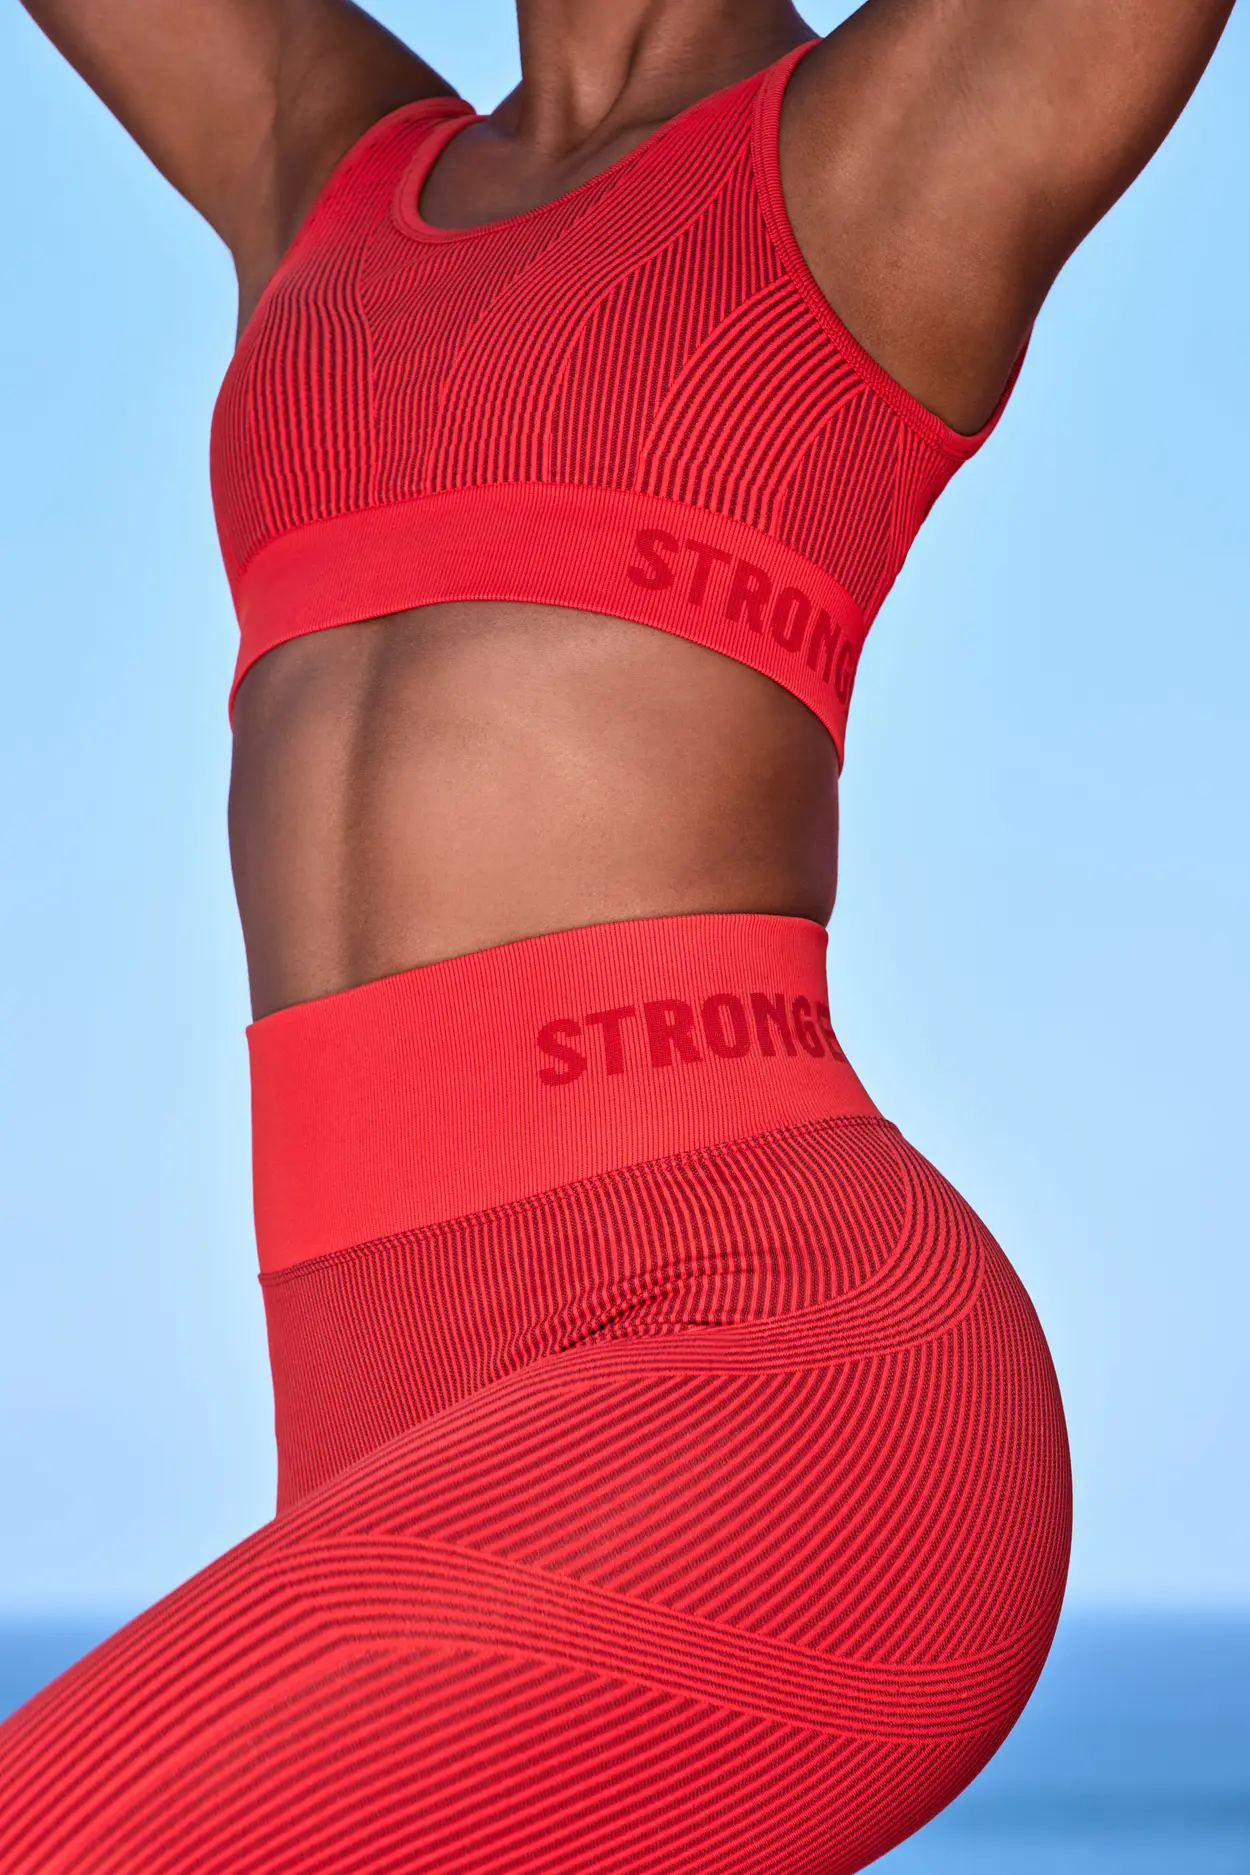 Prisma Shimmer Leggings in Strawberry - Get Yours Now!